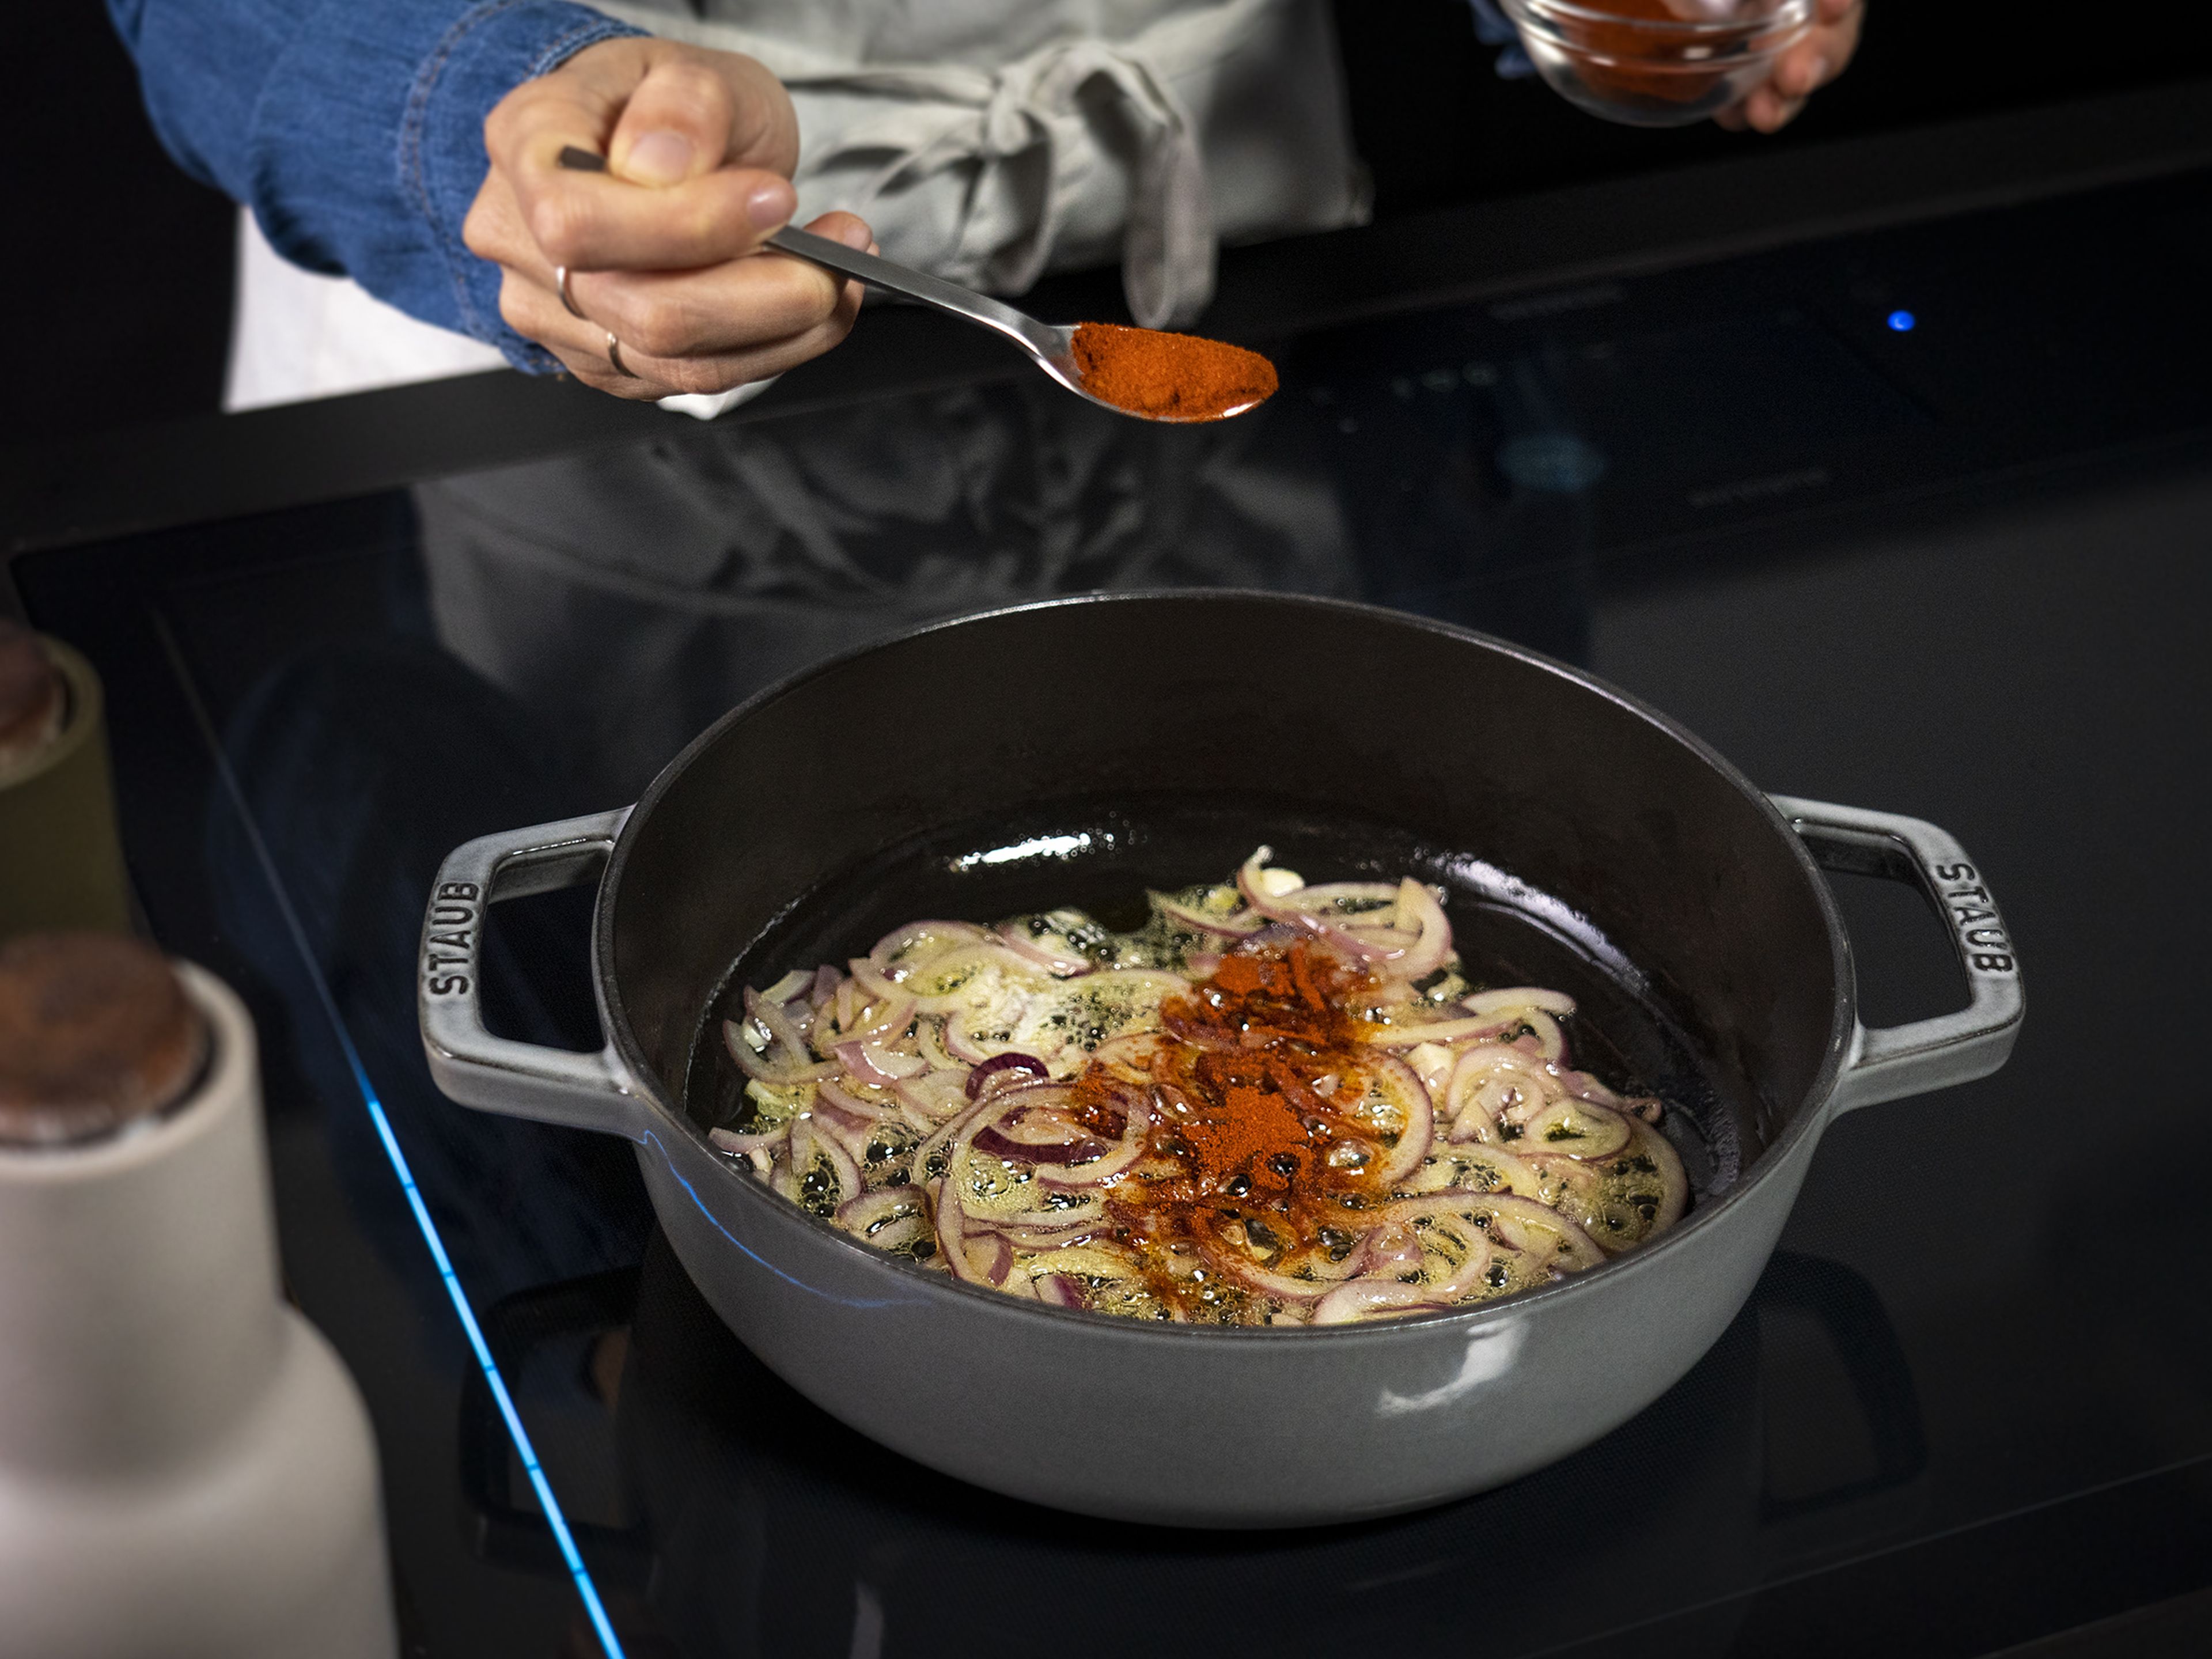 Set a pan with a lid over medium-low heat and add some olive oil. Add chopped onion and sauté for approx. 5 min., or until onion is translucent. Add half the paprika and stir everything together for approx. 1 min.